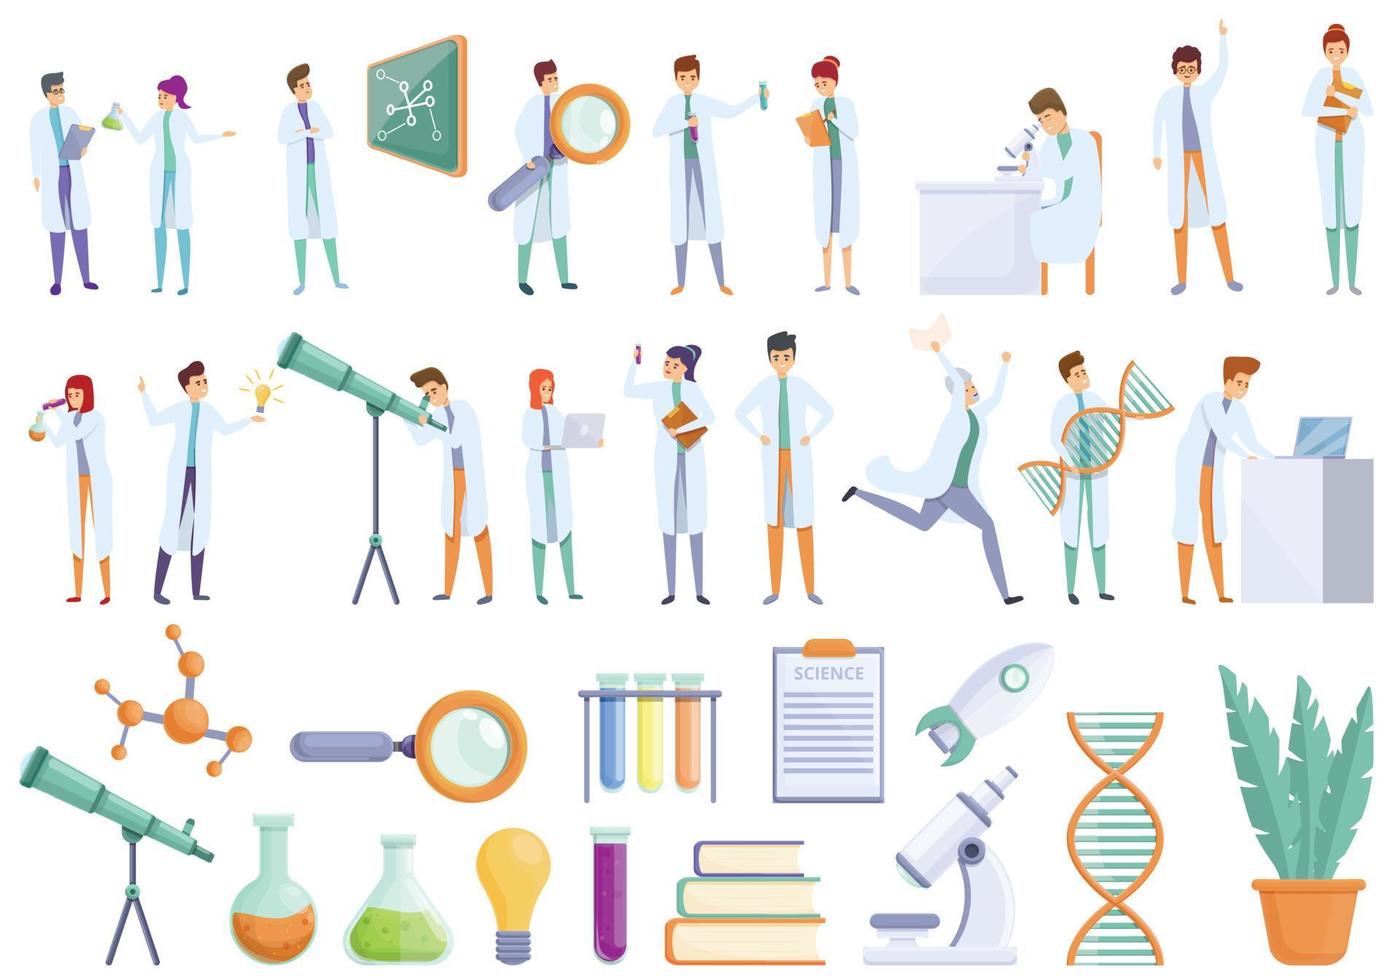 Research scientist icons set, cartoon style vector